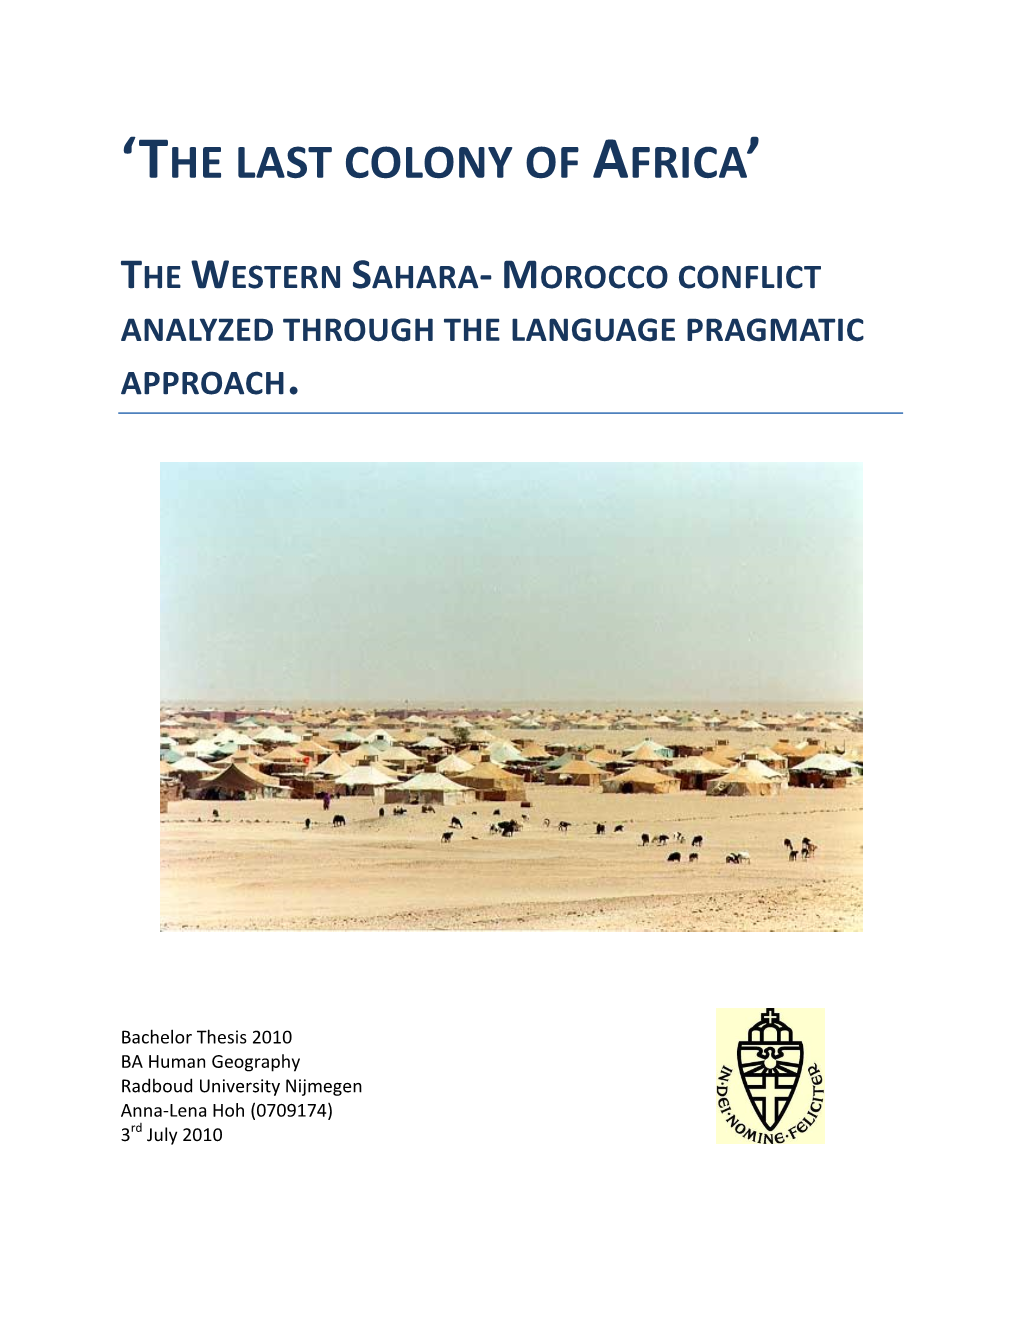 The Western Sahara- Morocco Conflict Analyzed Through the Language Pragmatic Approach